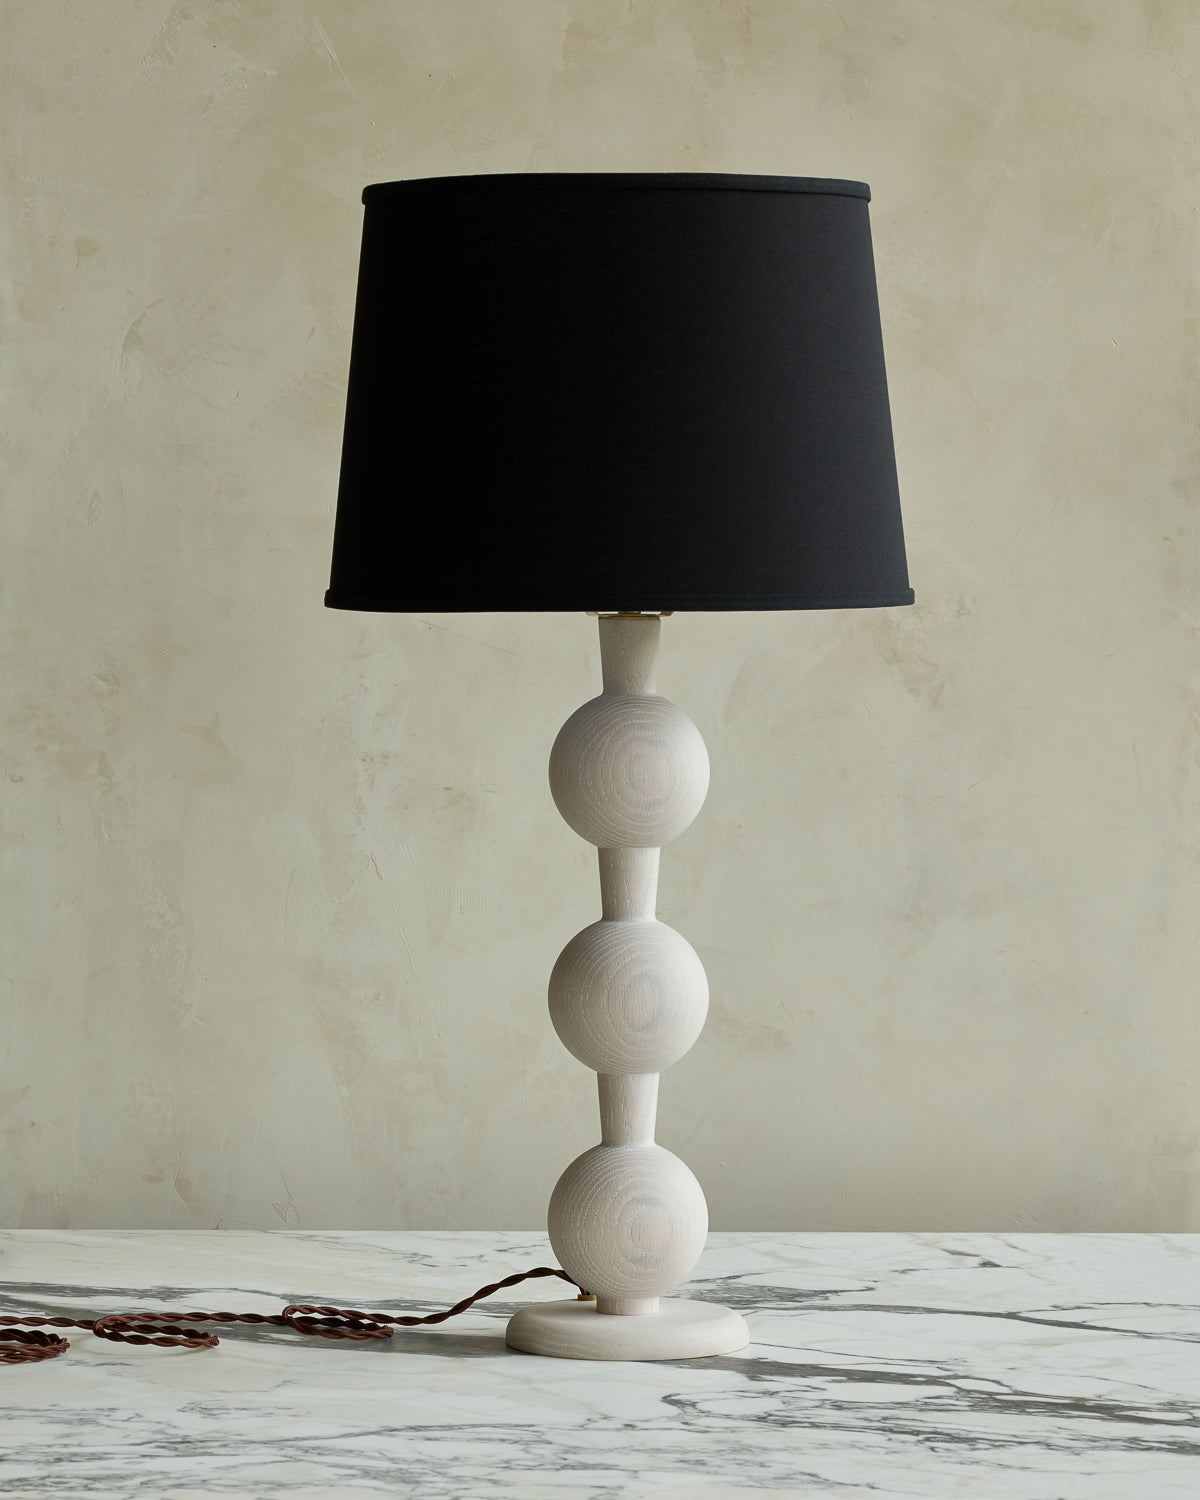 Sculptural solid wood table lamp with barbell design in white wash finish with black linen shade